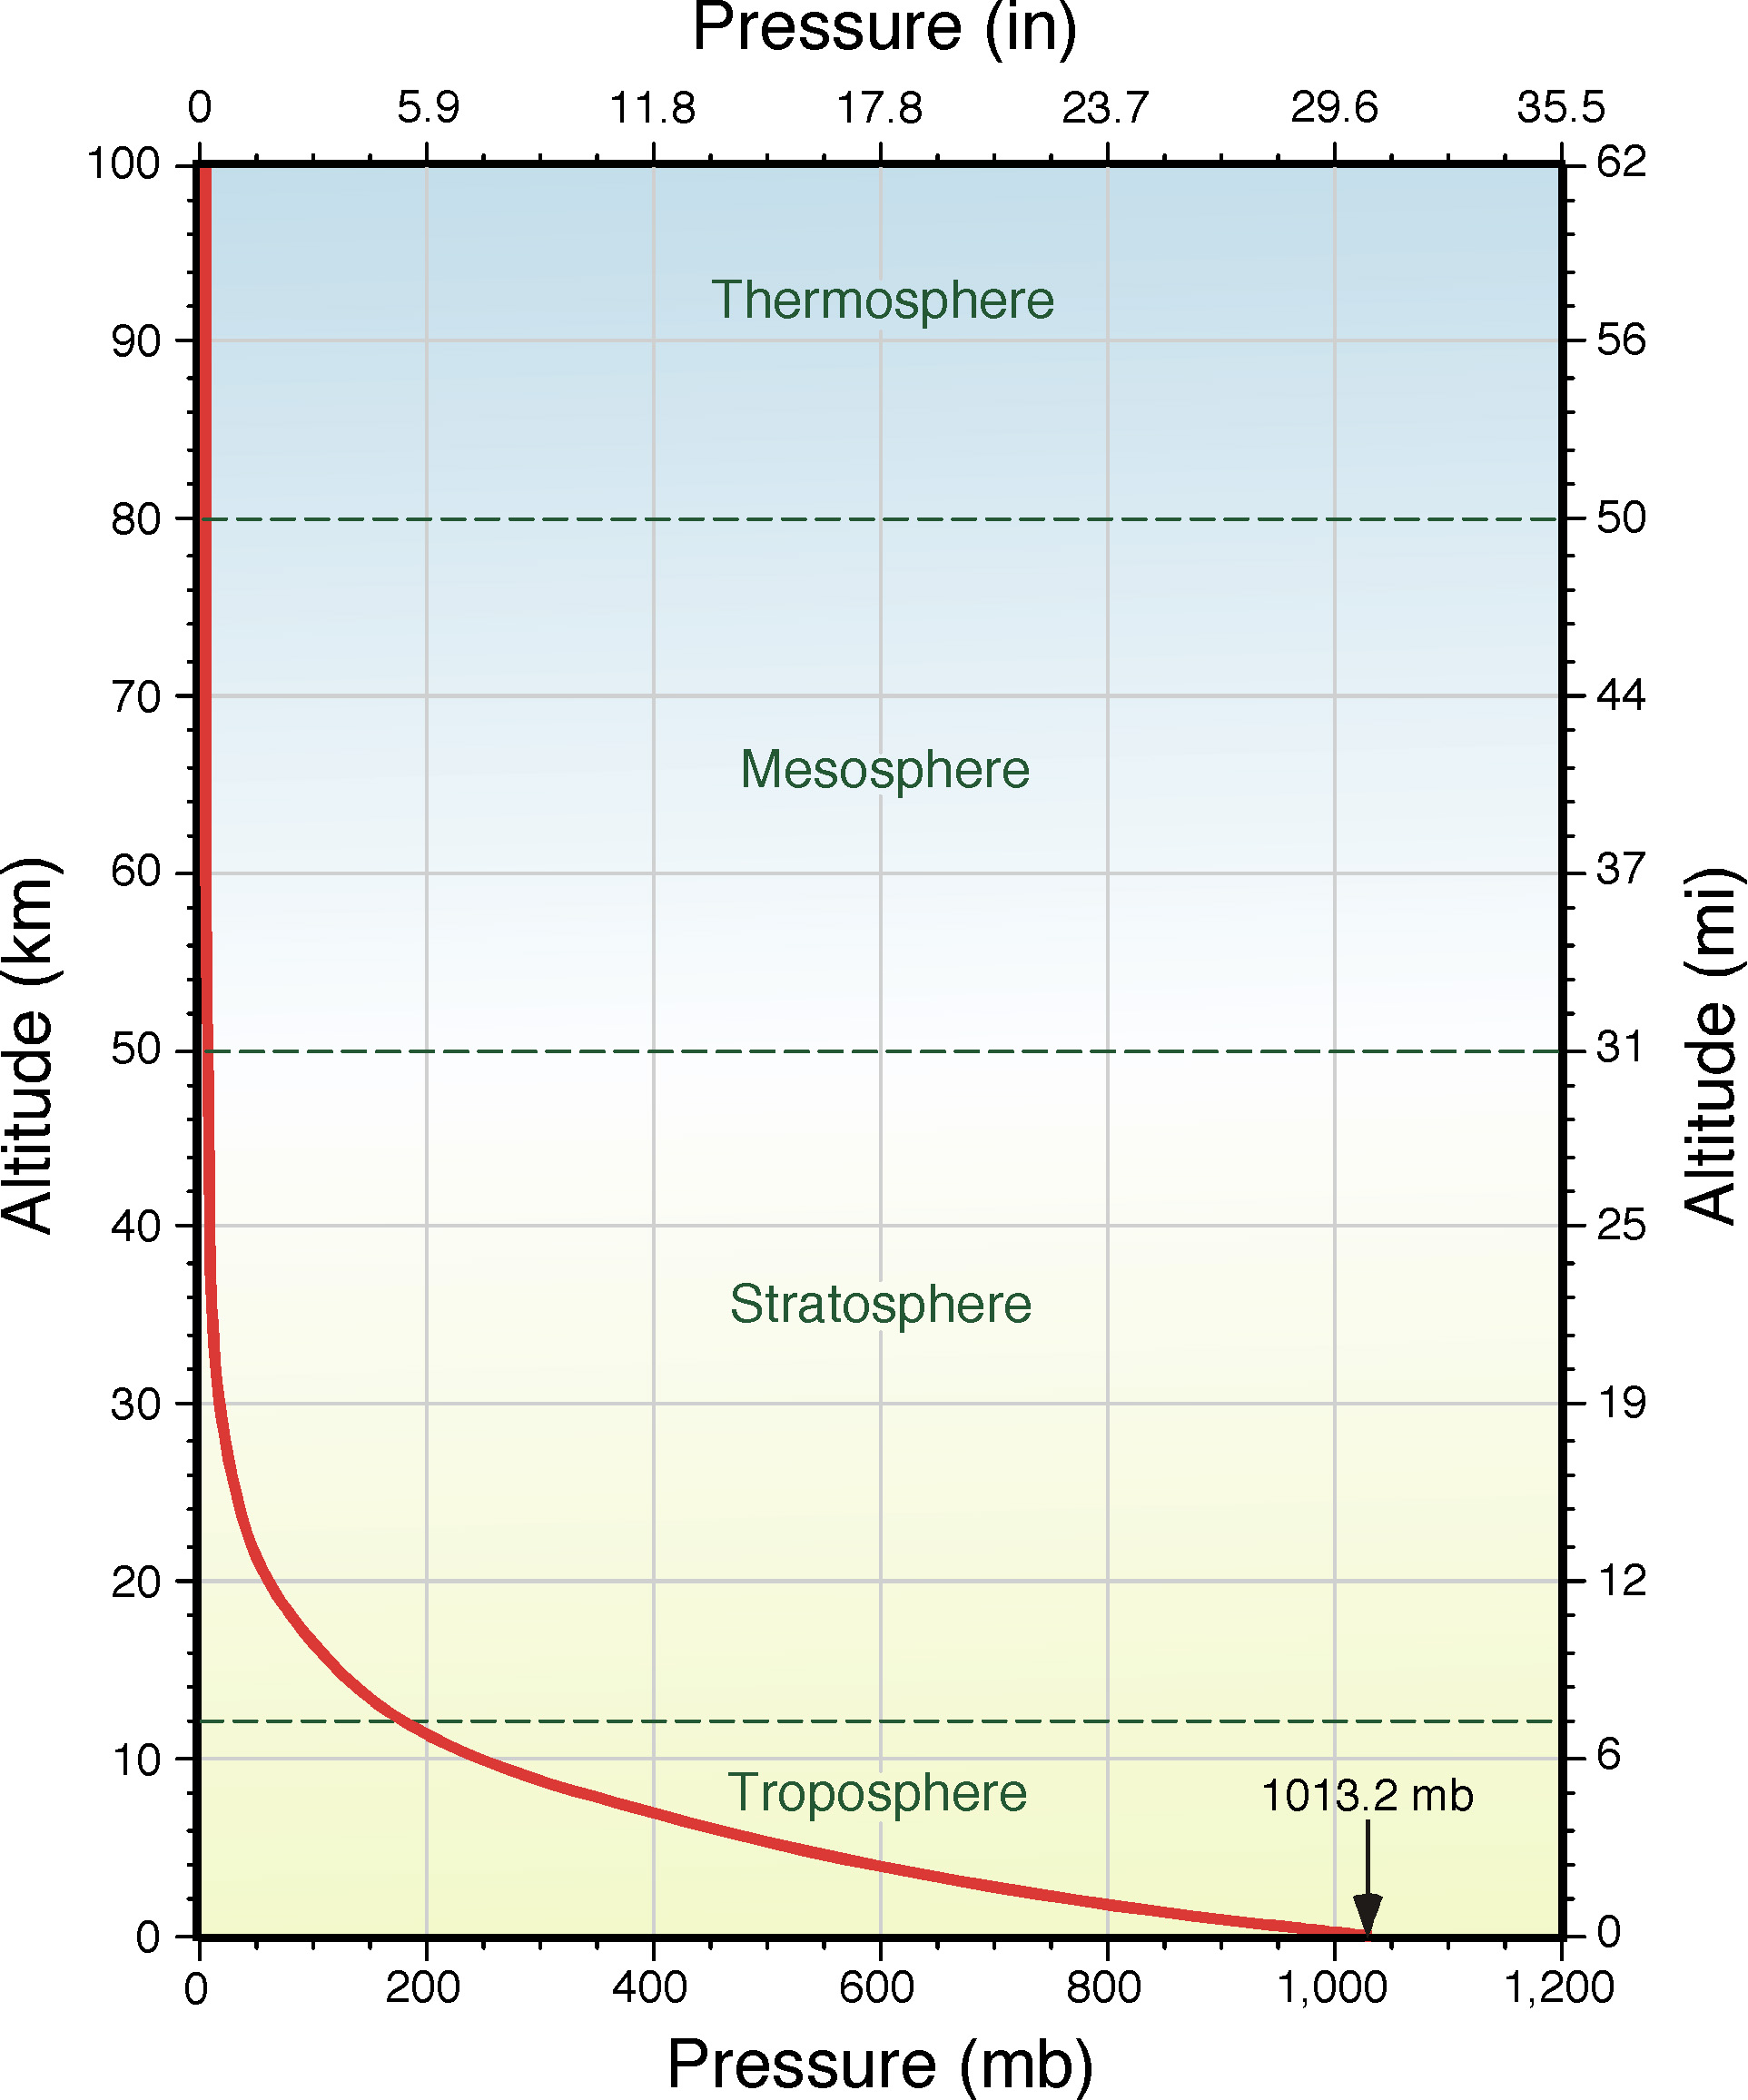 LABORATORY 3: ATMOSPHERE COMPOSITION, PRESSURE, AND CIRCULATION ...